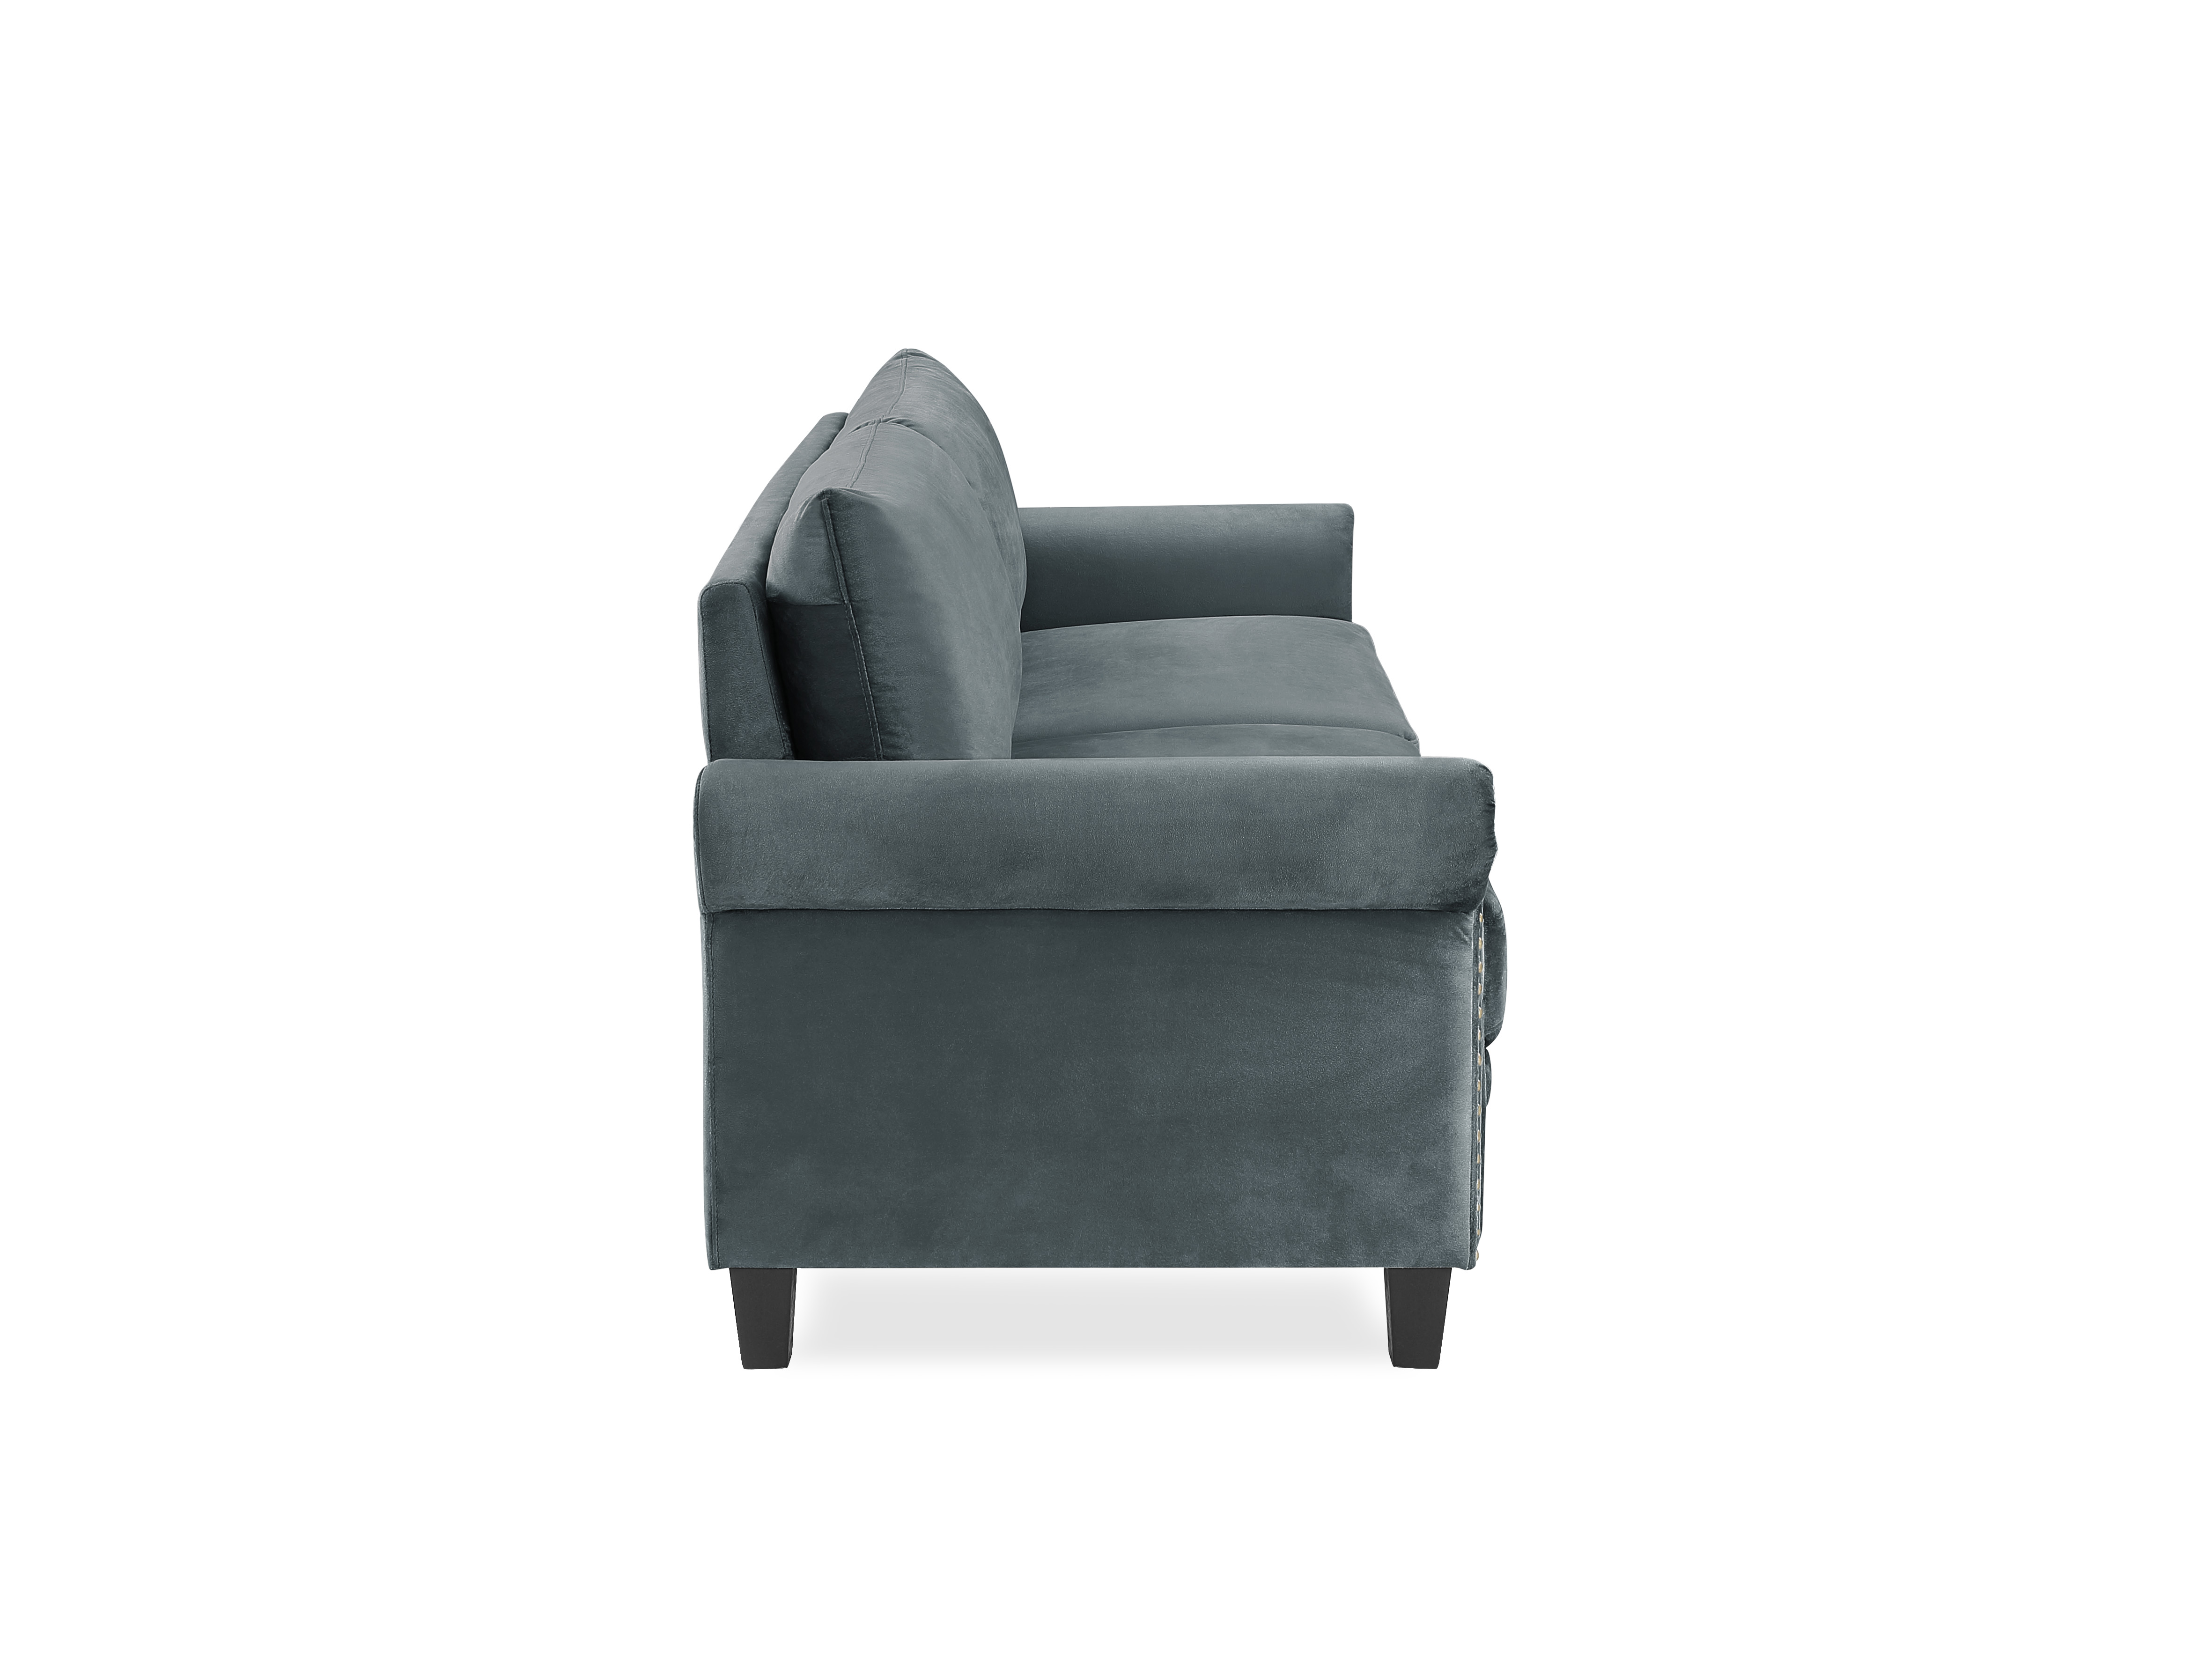 Lifestyle Solutions Fallon Rolled Arms Sofa, Gray Fabric - image 4 of 9